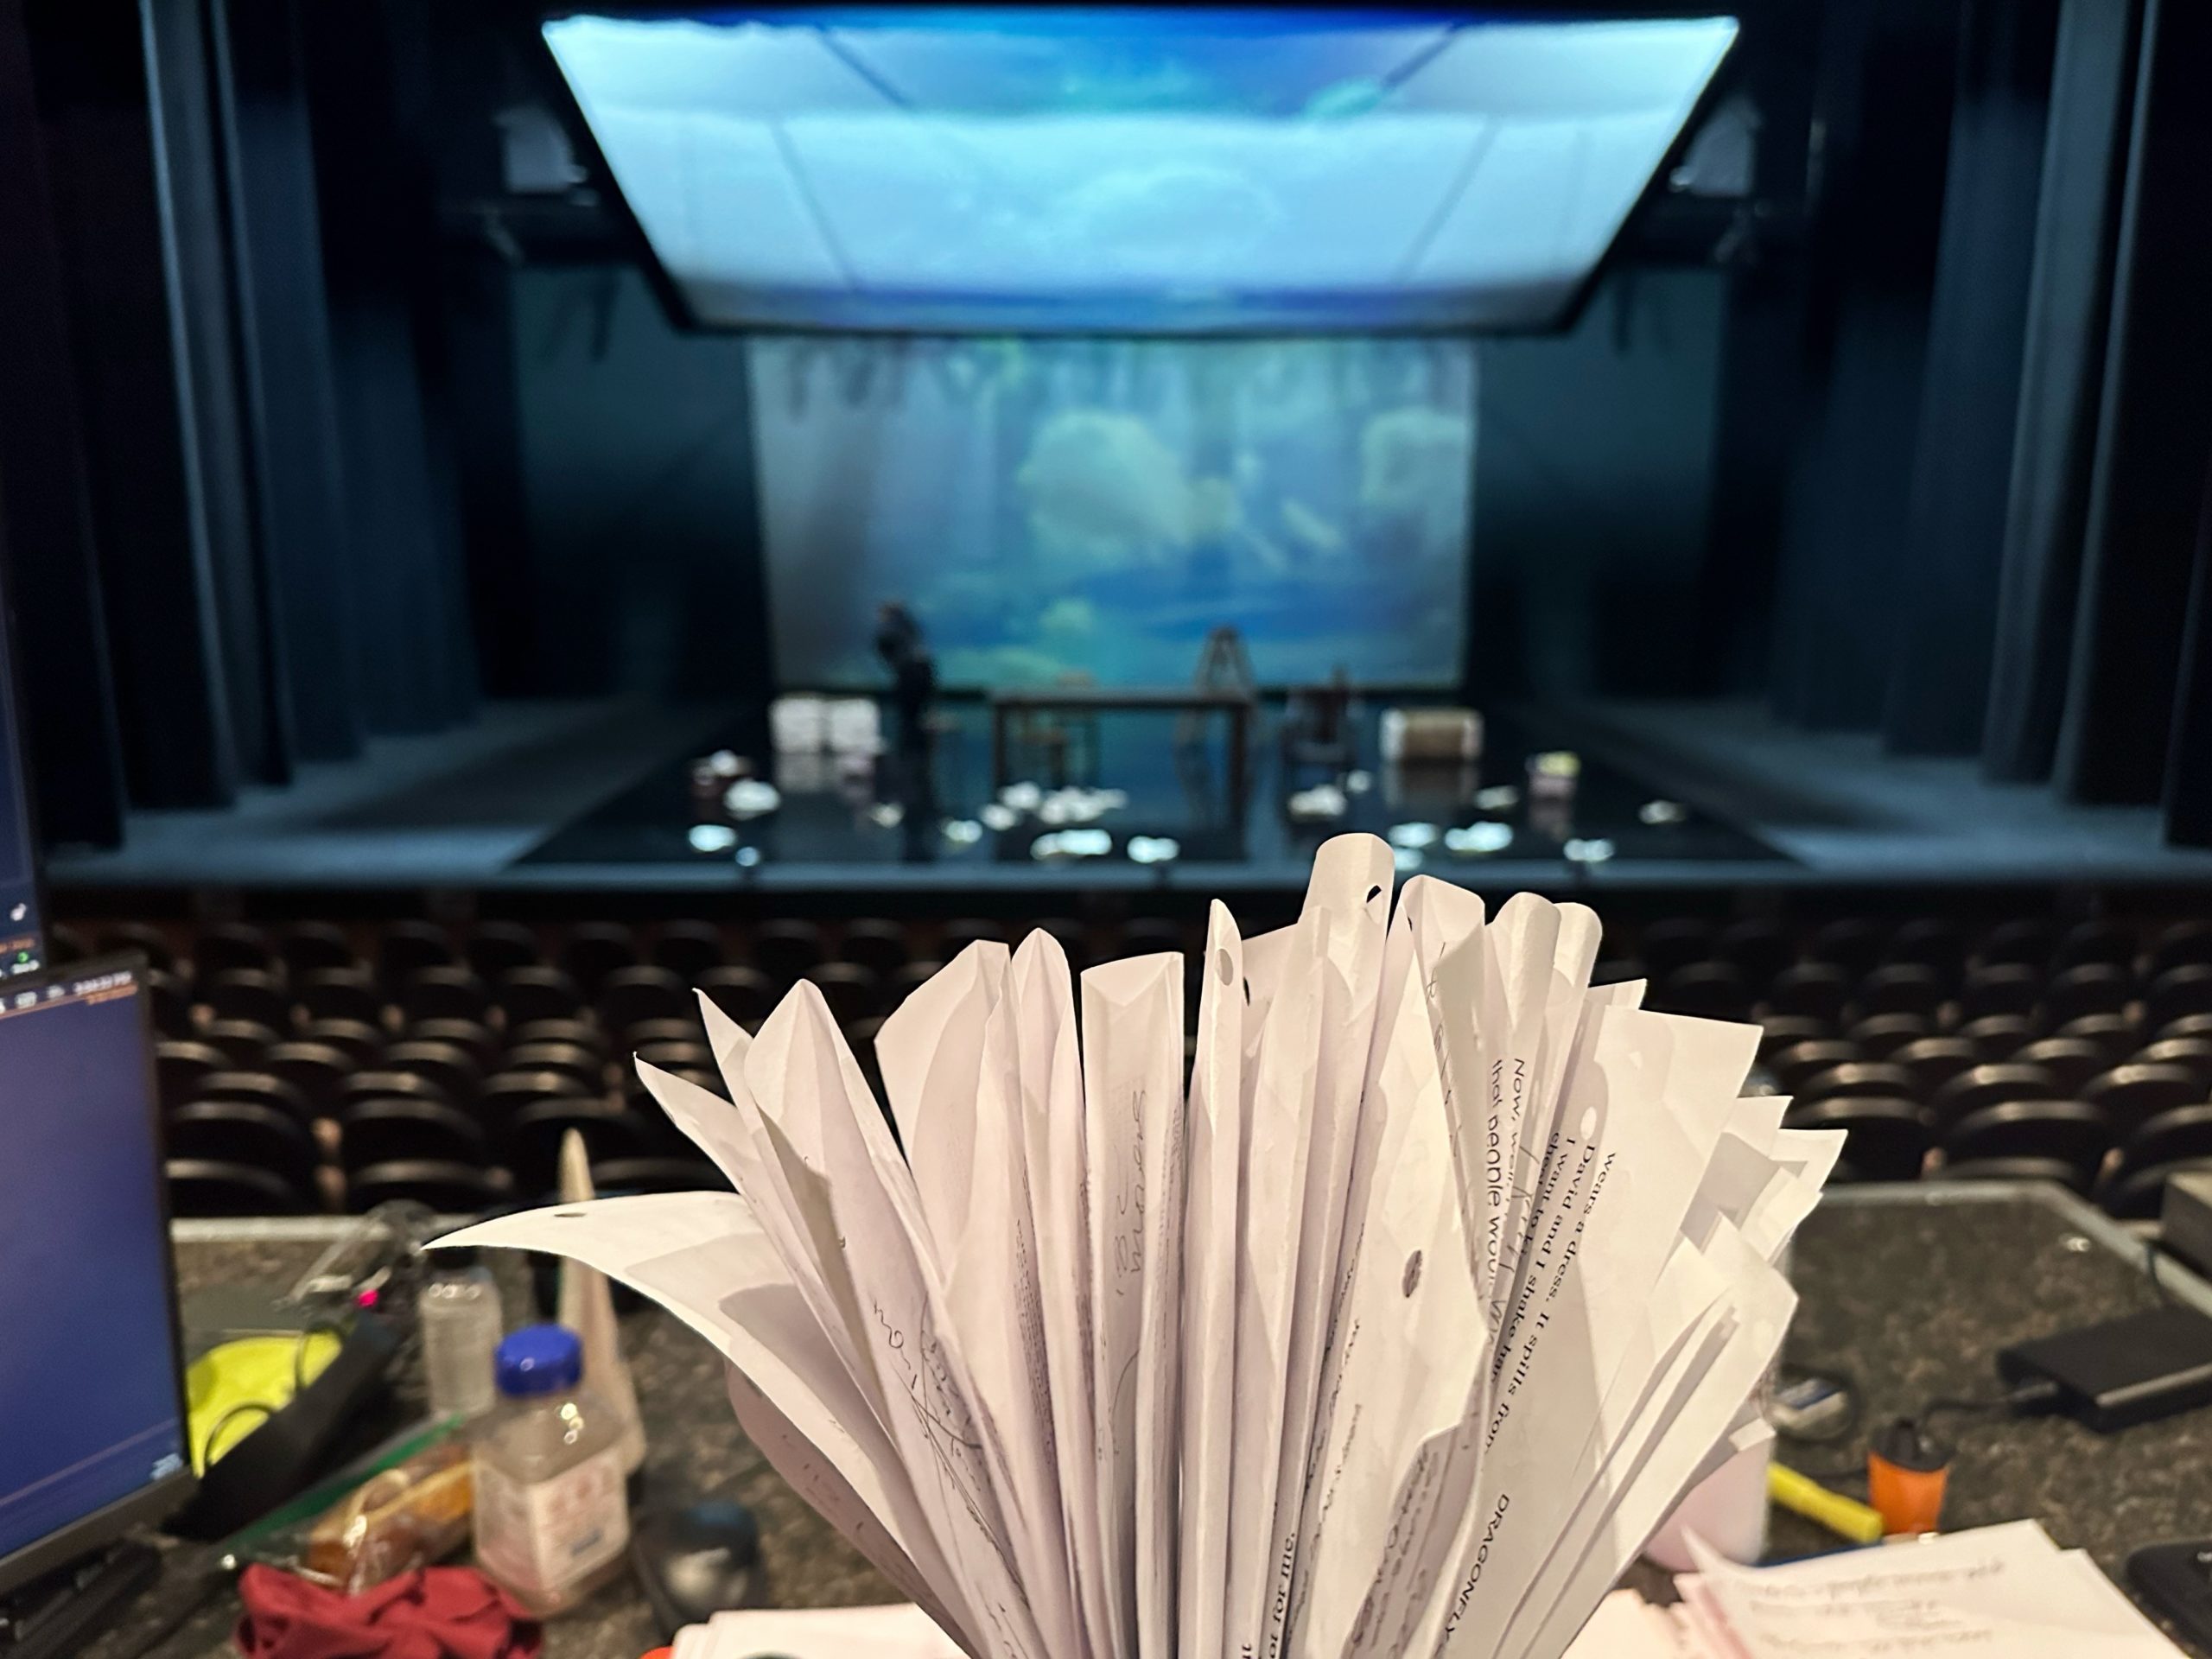 Pages of notes sitting up on desk in front of lit theatre stage